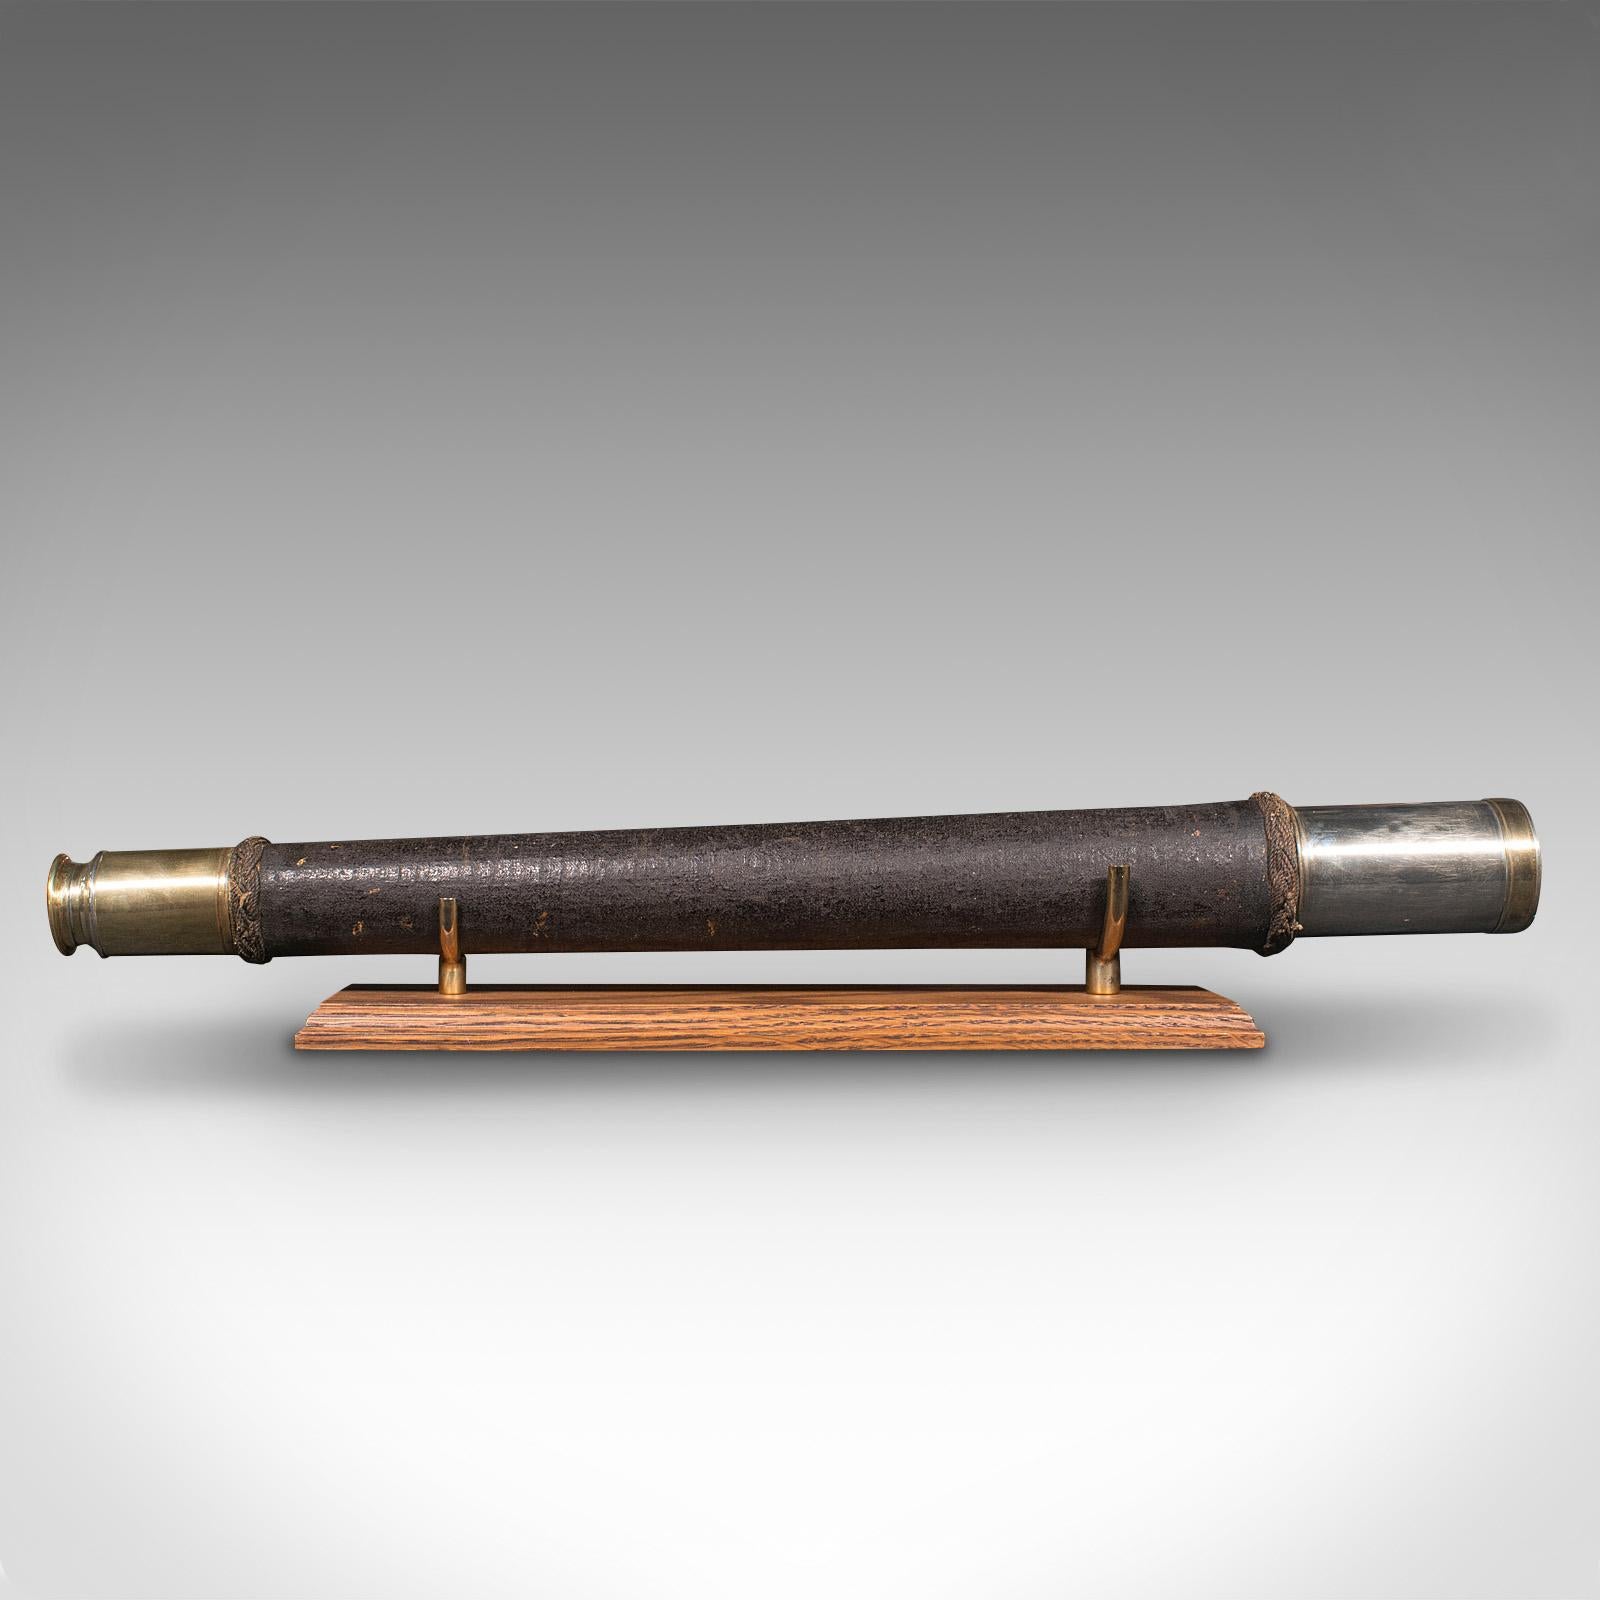 British Antique Officer of the Watch Telescope, English, After Dollond, Victorian, 1890 For Sale